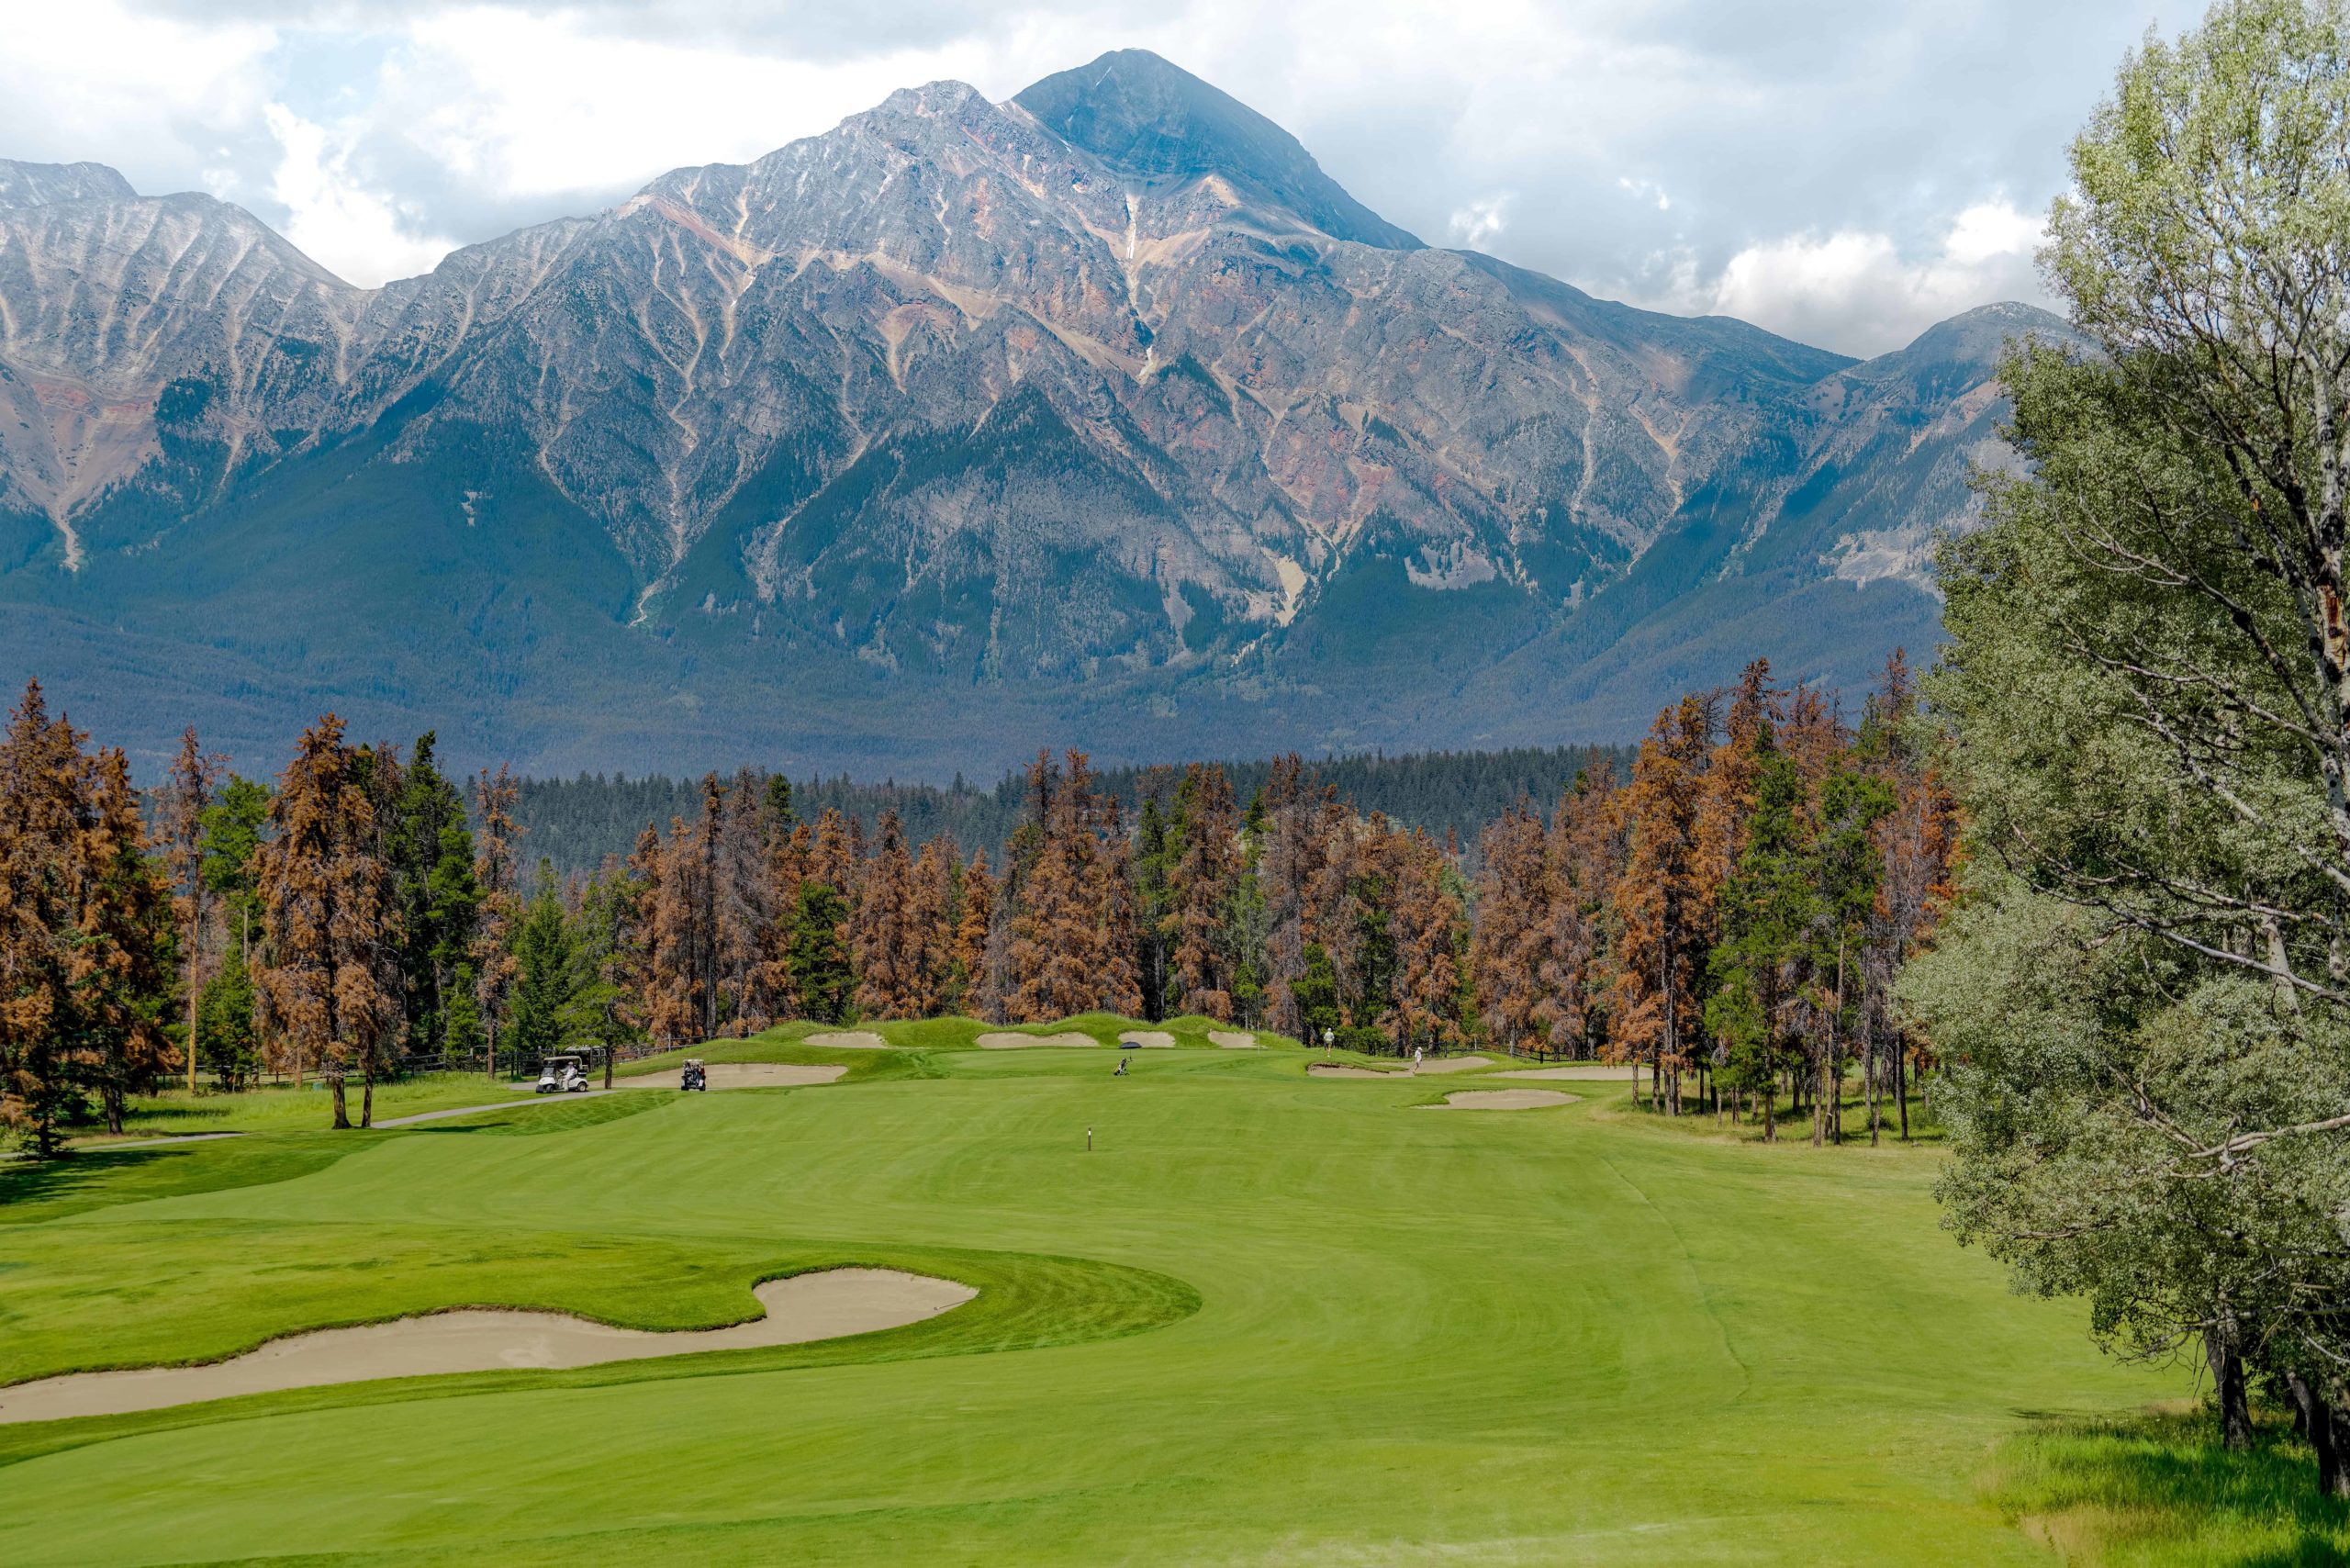 The Fairmont Jasper Park Golf Course is a great thing to do in Jasper for the eager golfer